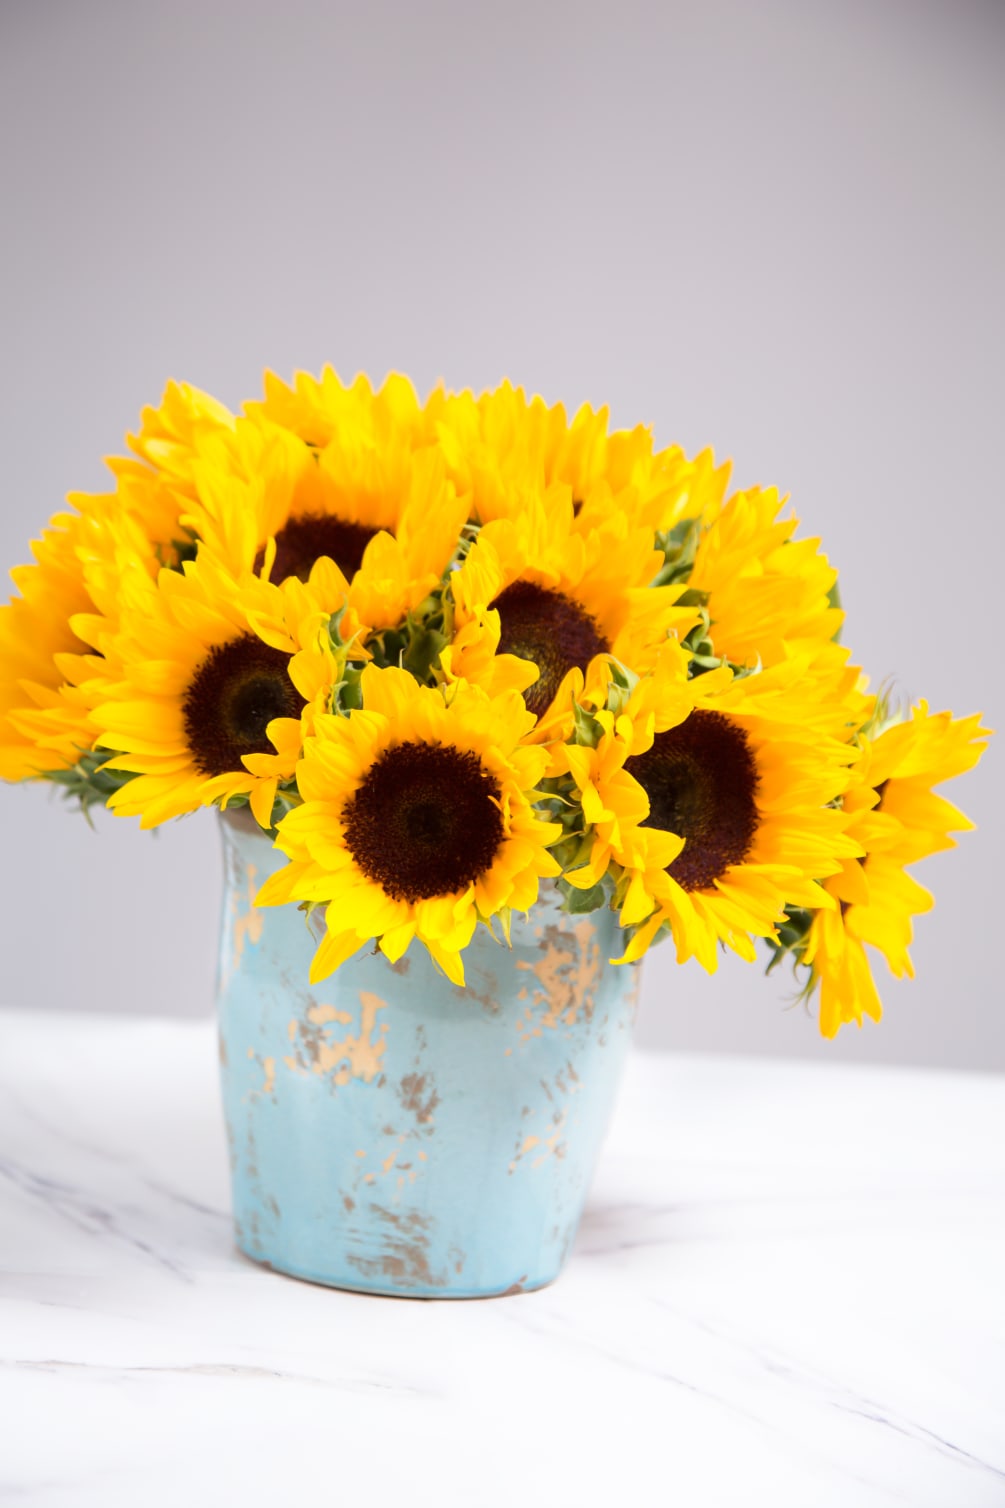 Sunflowers are one of the most amazing flowers. Just as these ones